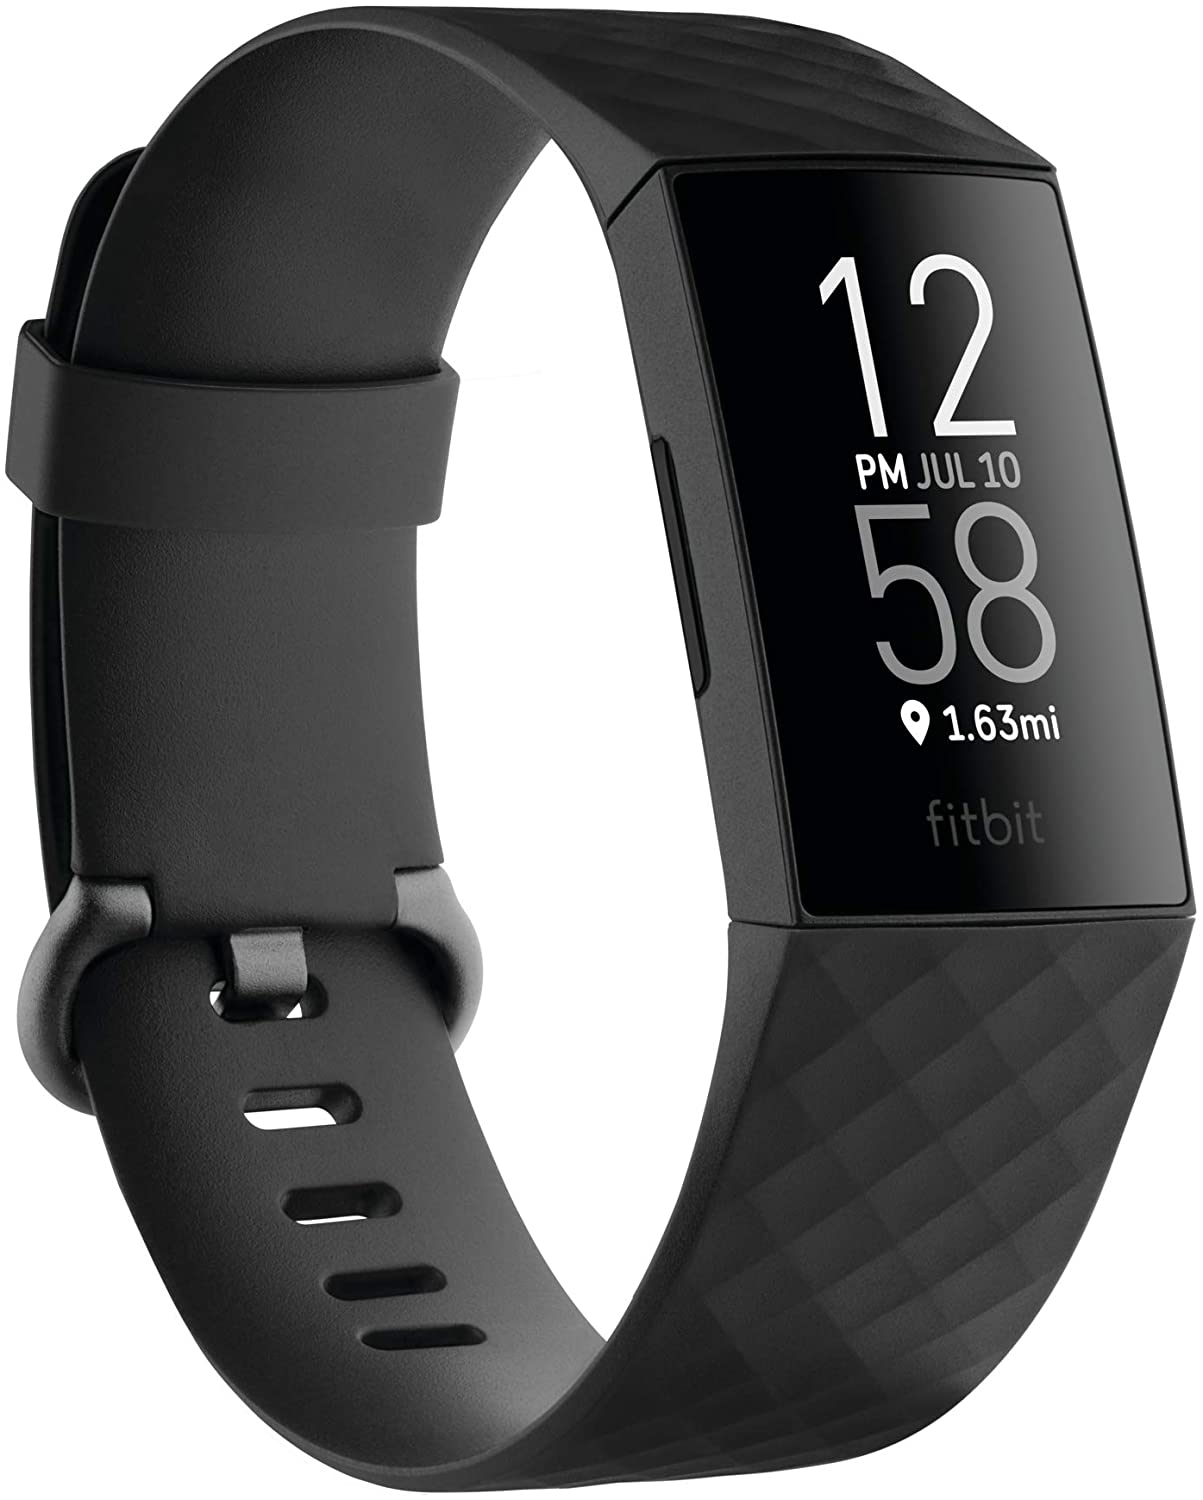 fitbit surge vs charge 4